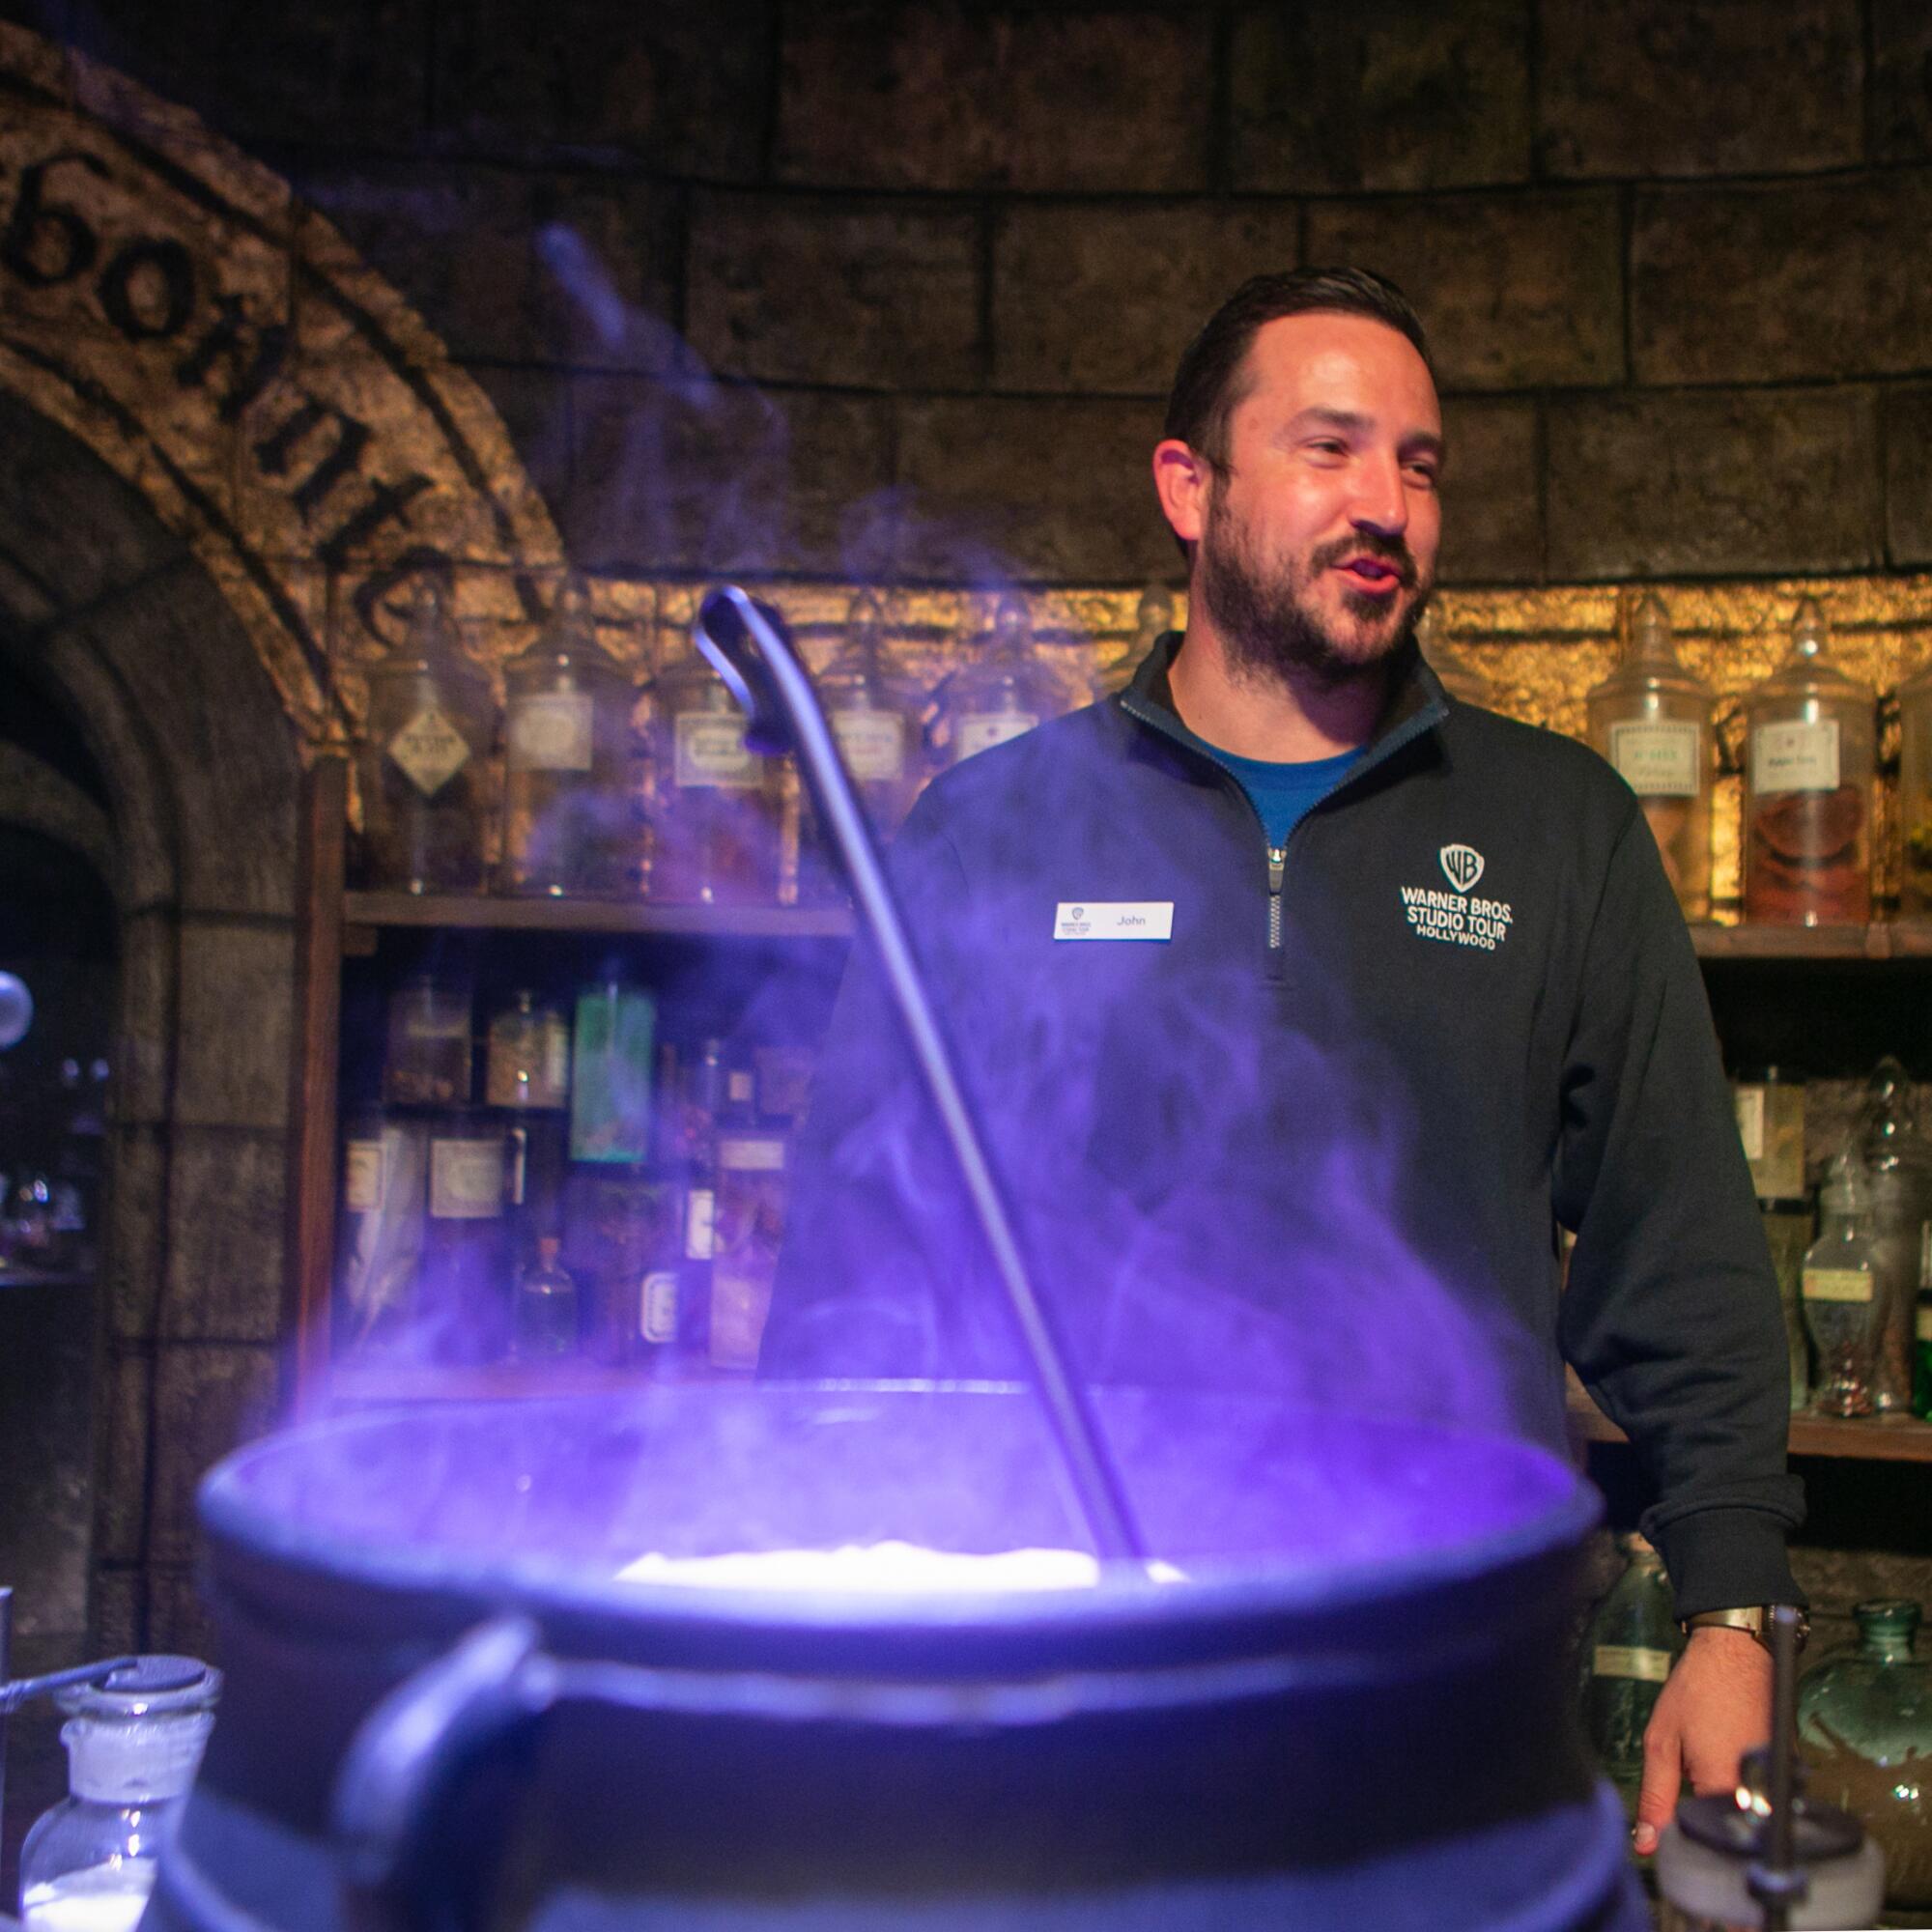 A man stands behind a cauldron that is glowing purple.